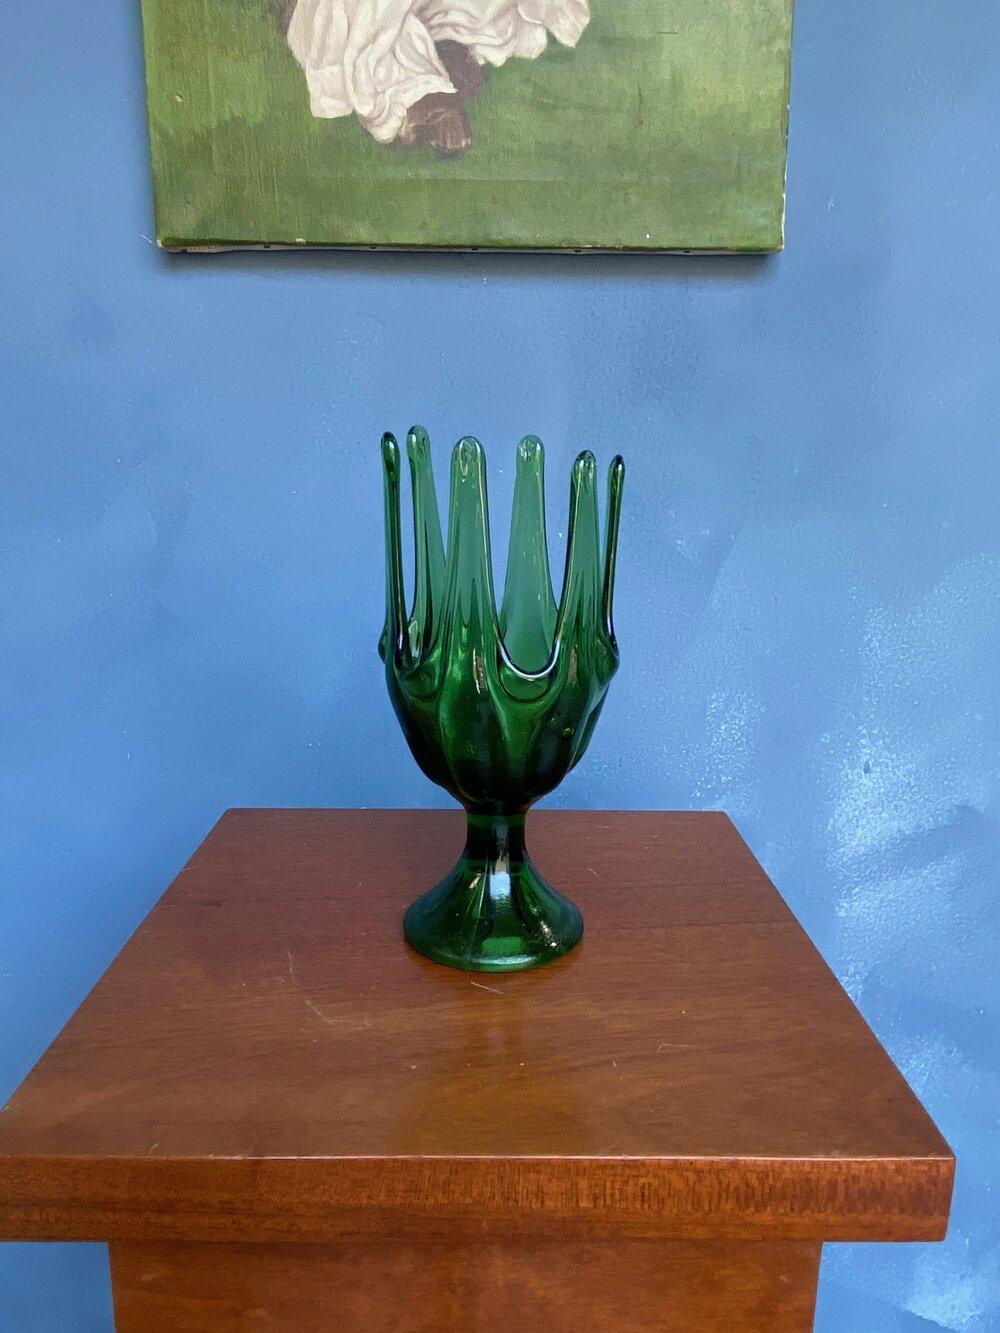 Vintage footed handkerchief vase in green, made by Viking Glass, circa 1968. Very good vintage condition.

Ref #: H0721-01

Dimensions: 9”H x 4.5”Diameter (3.5”Diameter at the base)